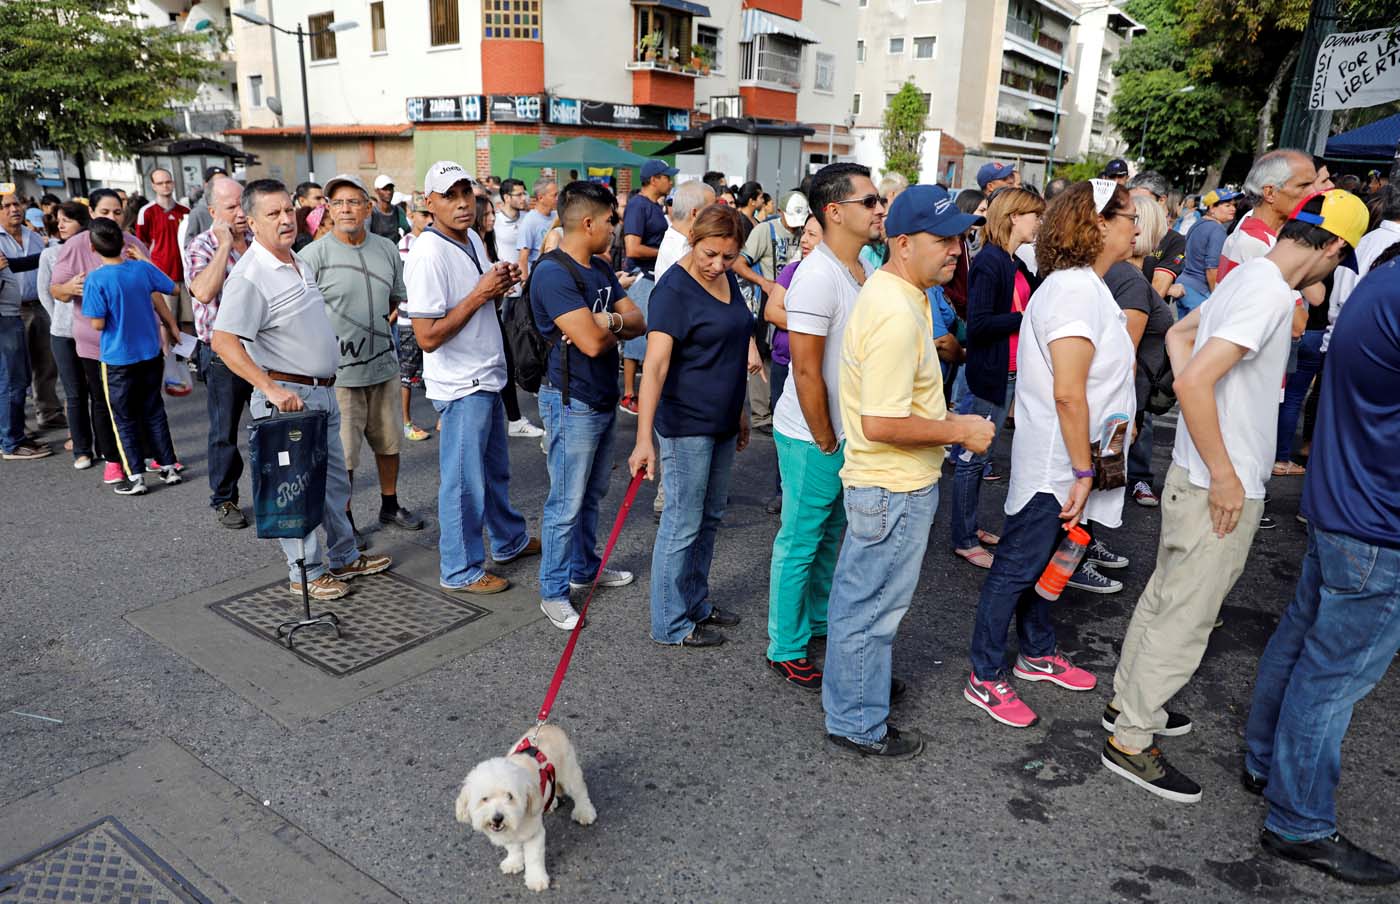 People stand in line to cast their vote at a polling station during an unofficial plebiscite against Venezuela's President Nicolas Maduro's government and his plan to rewrite the constitution, in Caracas, Venezuela July 16, 2017. REUTERS/Andres Martinez Casares